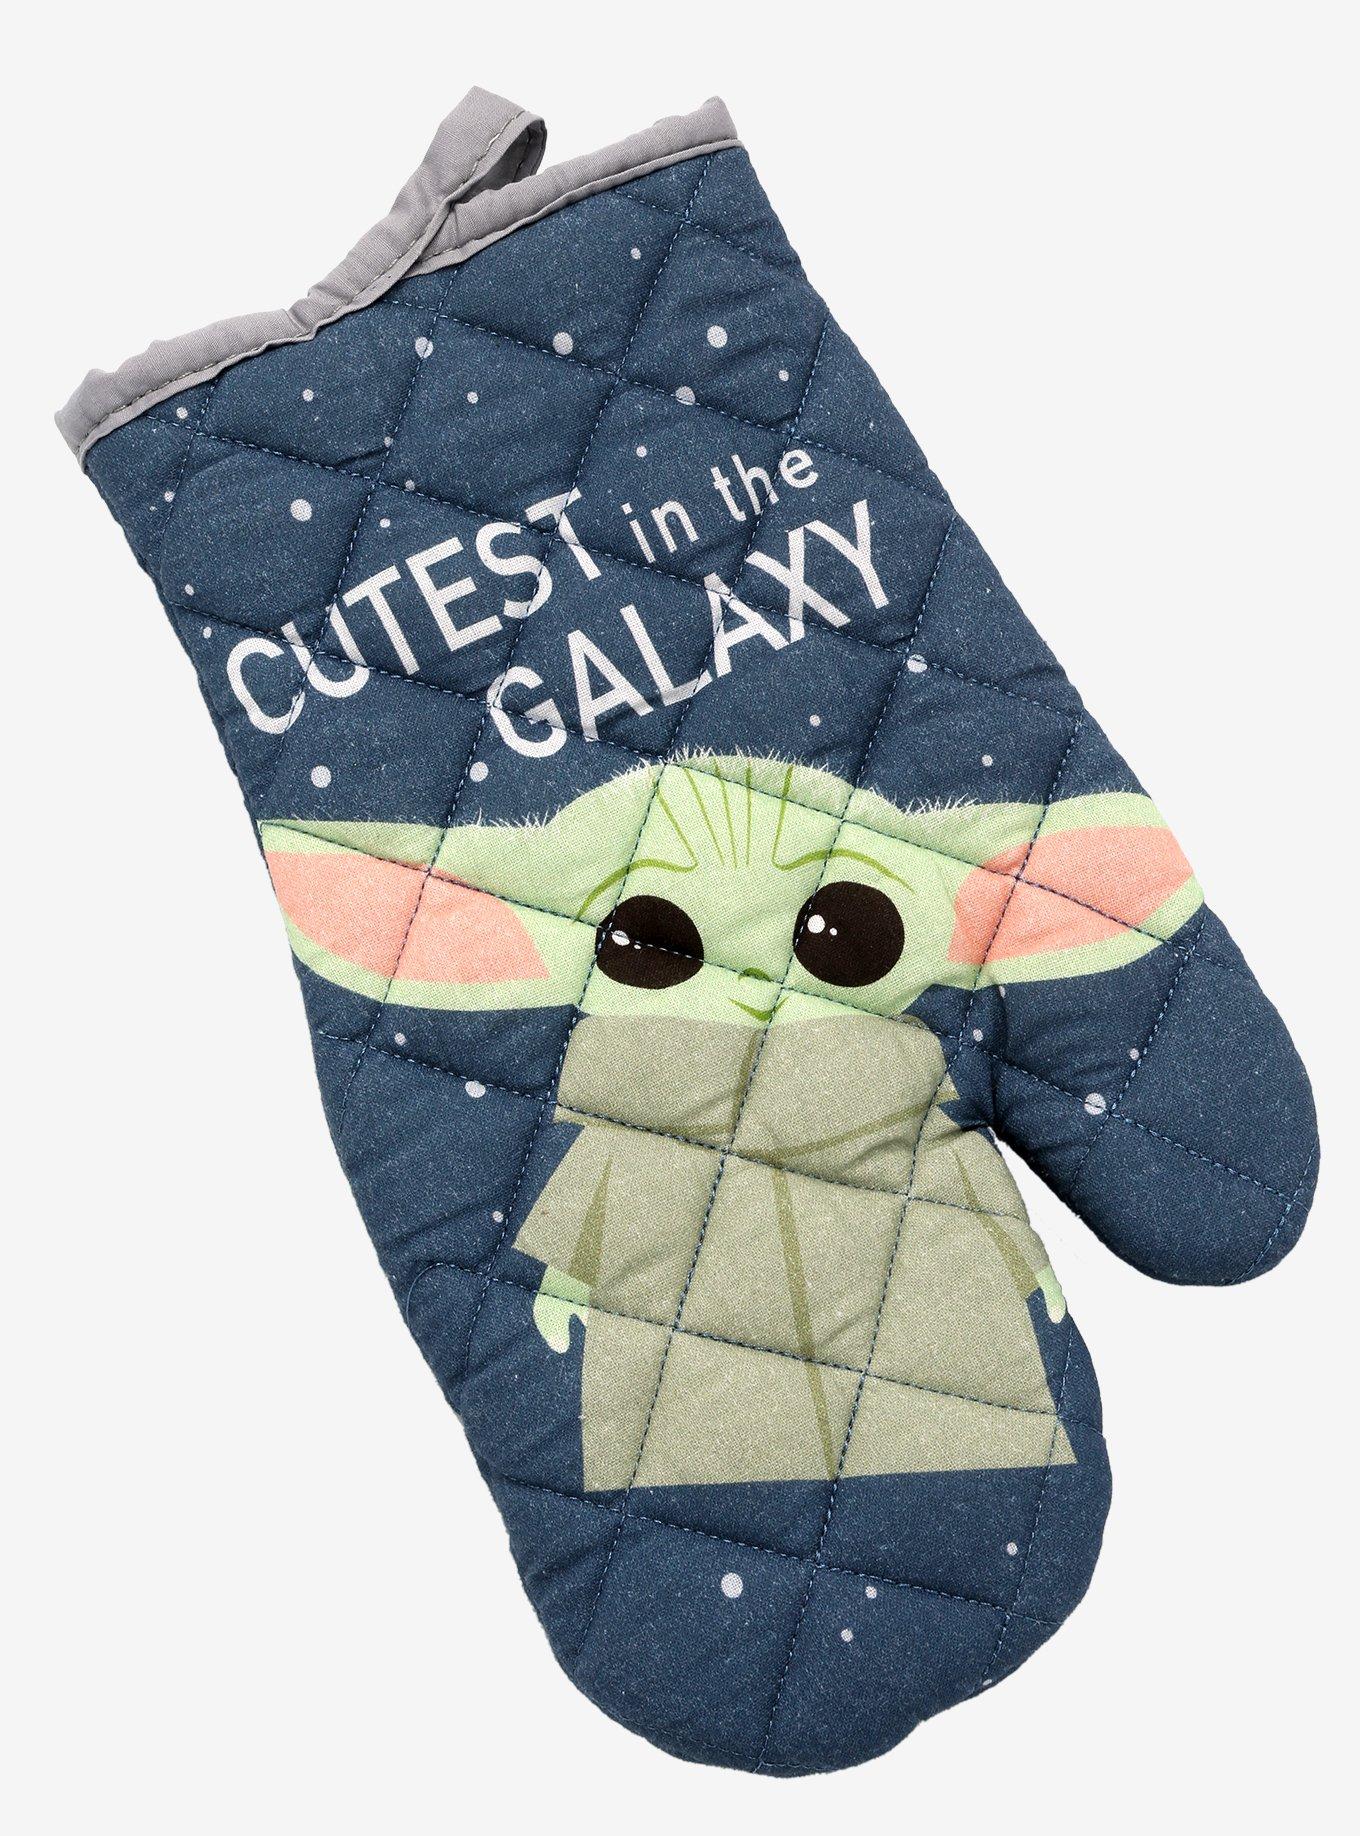 Star Wars oven mitts